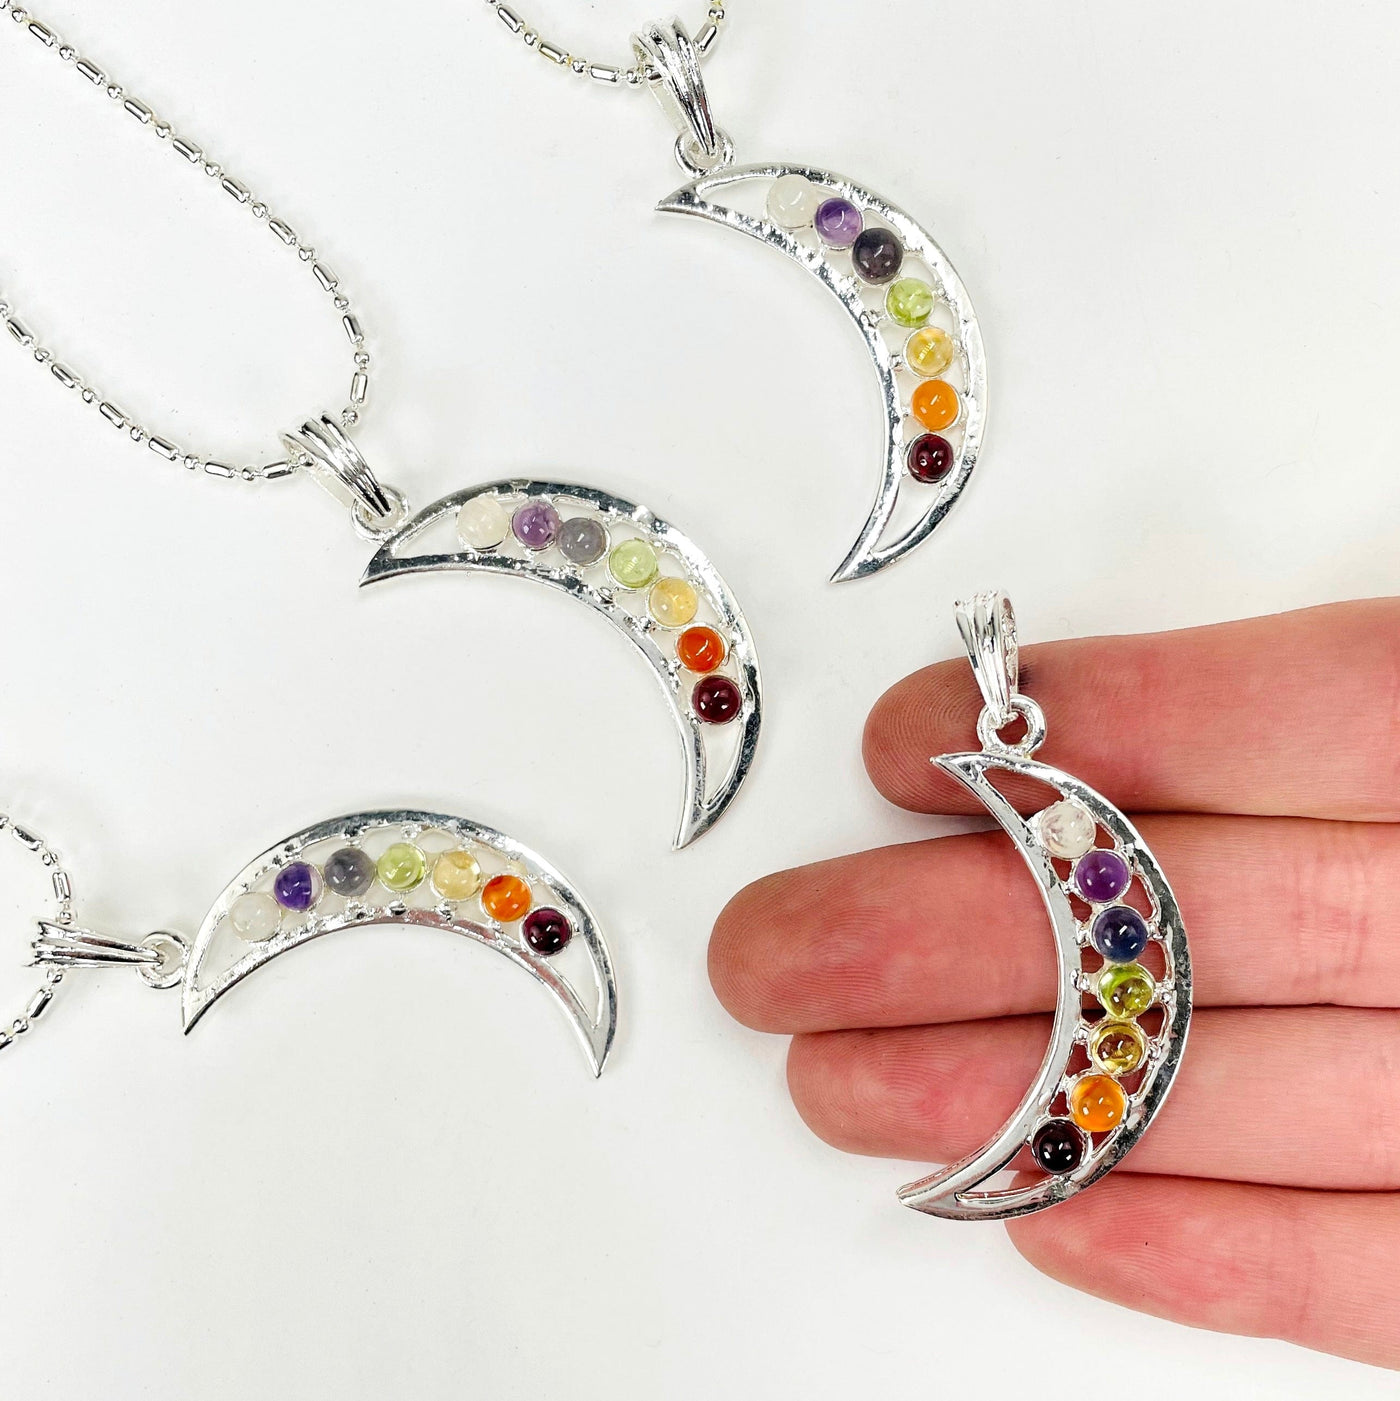 one chakra crescent moon pendant necklace in hand with three others in the background